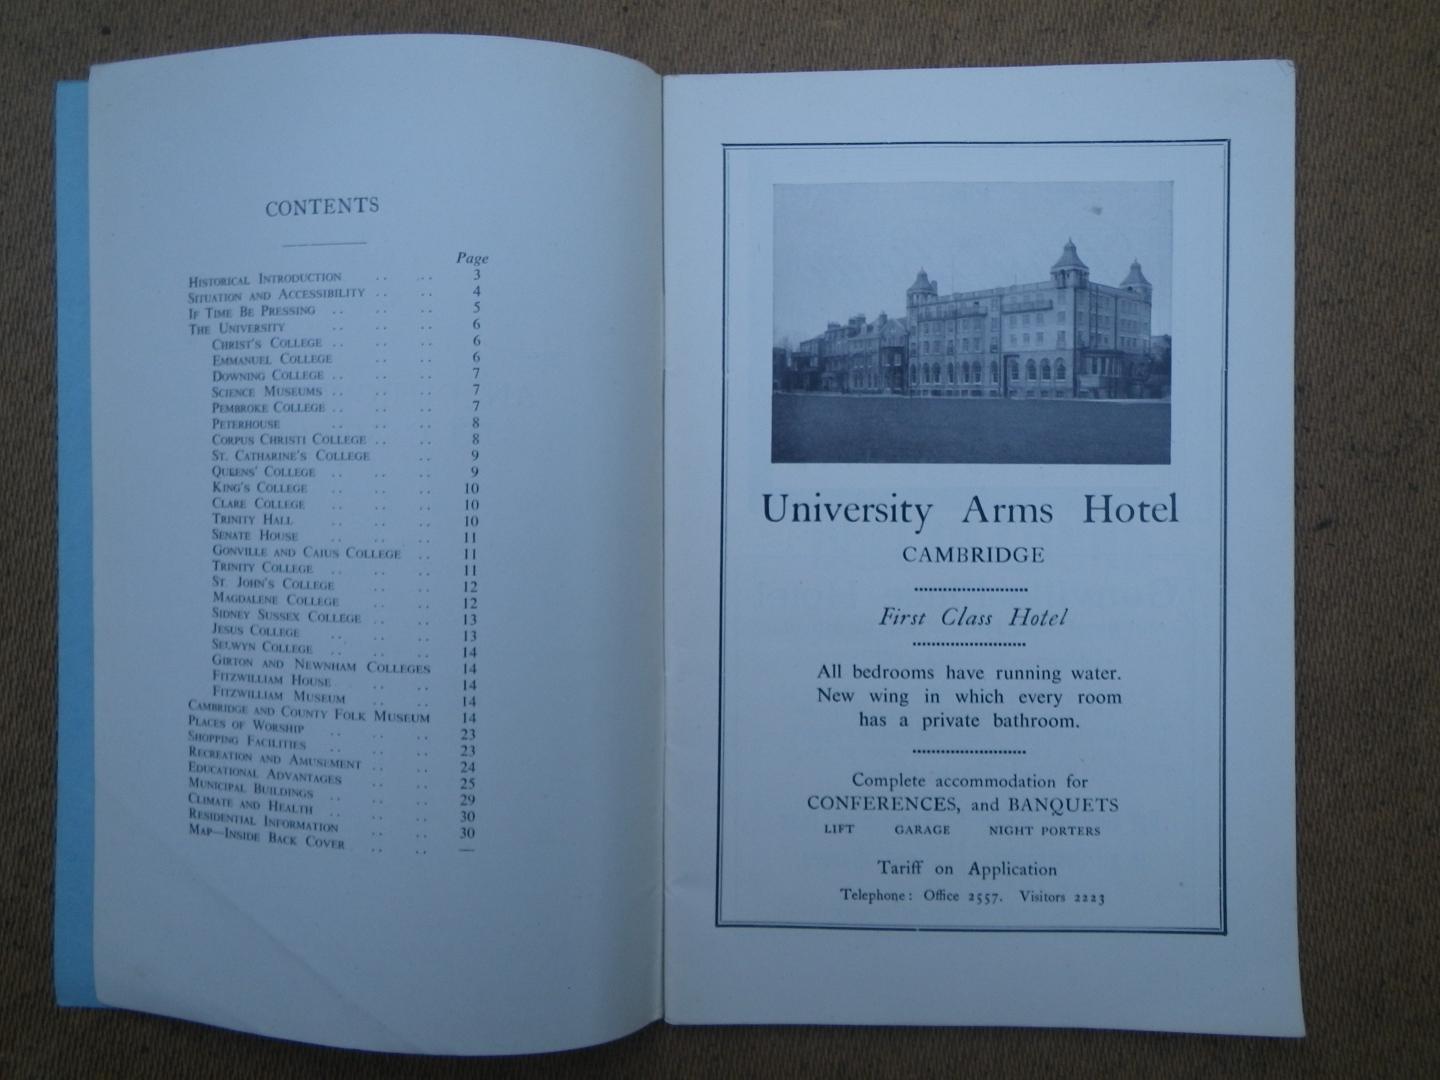 W.A. Munford - An Introduction to Cambridge Including Map